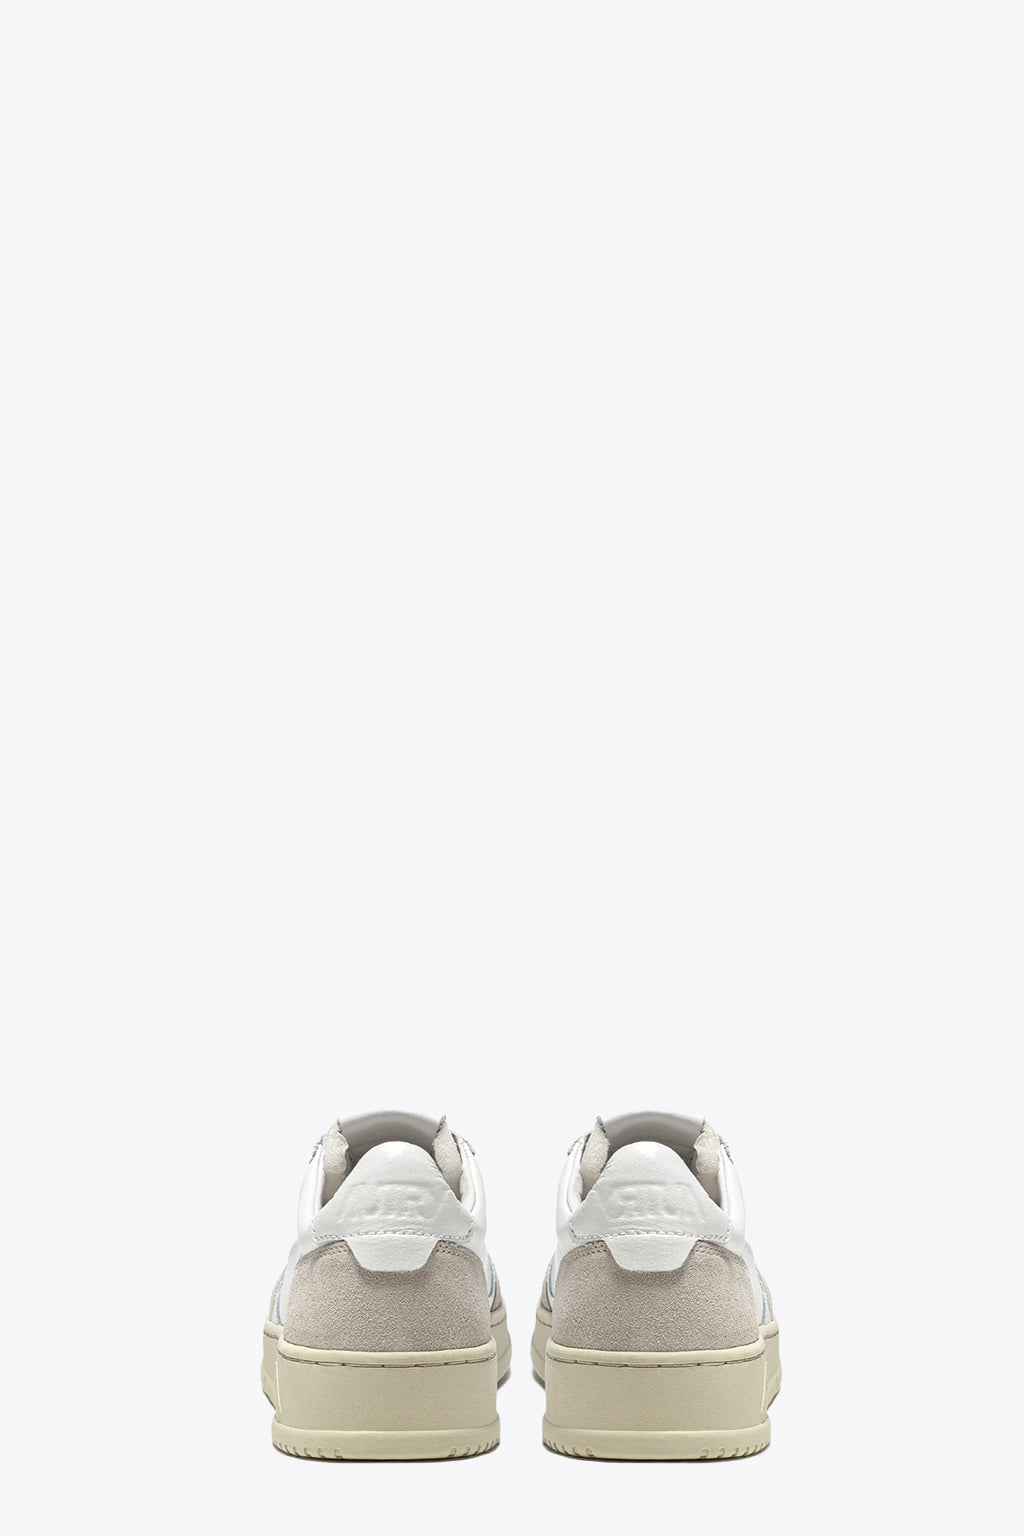 alt-image__White-leather-low-sneaker-with-suede-panels---Medalist